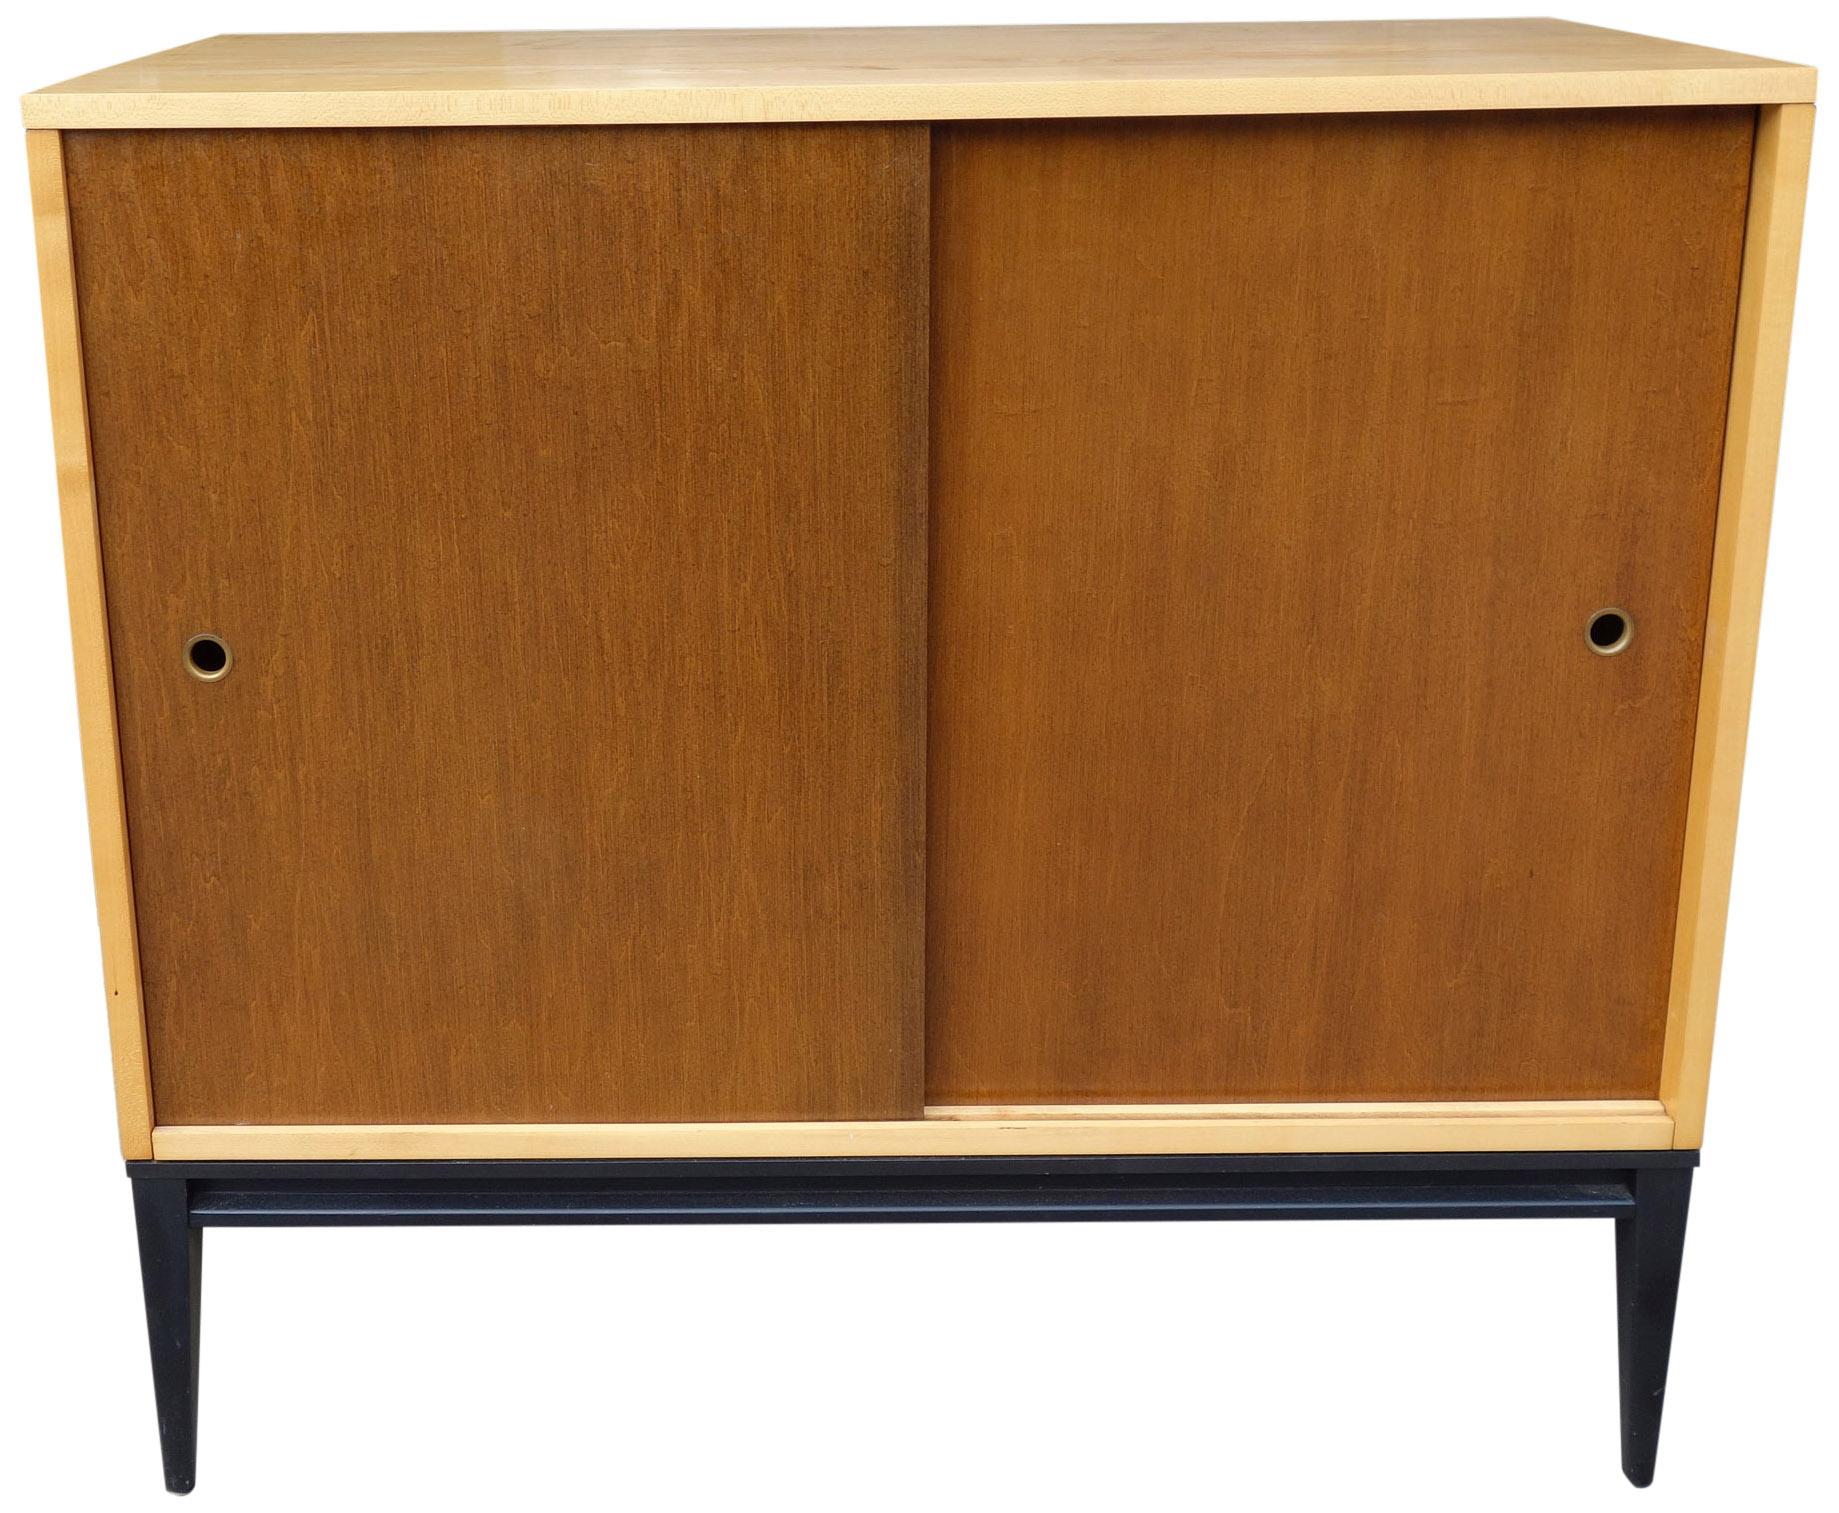 For your consideration is this wonderful sliding door cabinet designed by Paul McCobb -planner group- in excellent vintage condition and showing very little wear. Thoughtful proportions make this a very versatile case piece. This cabinet is made of